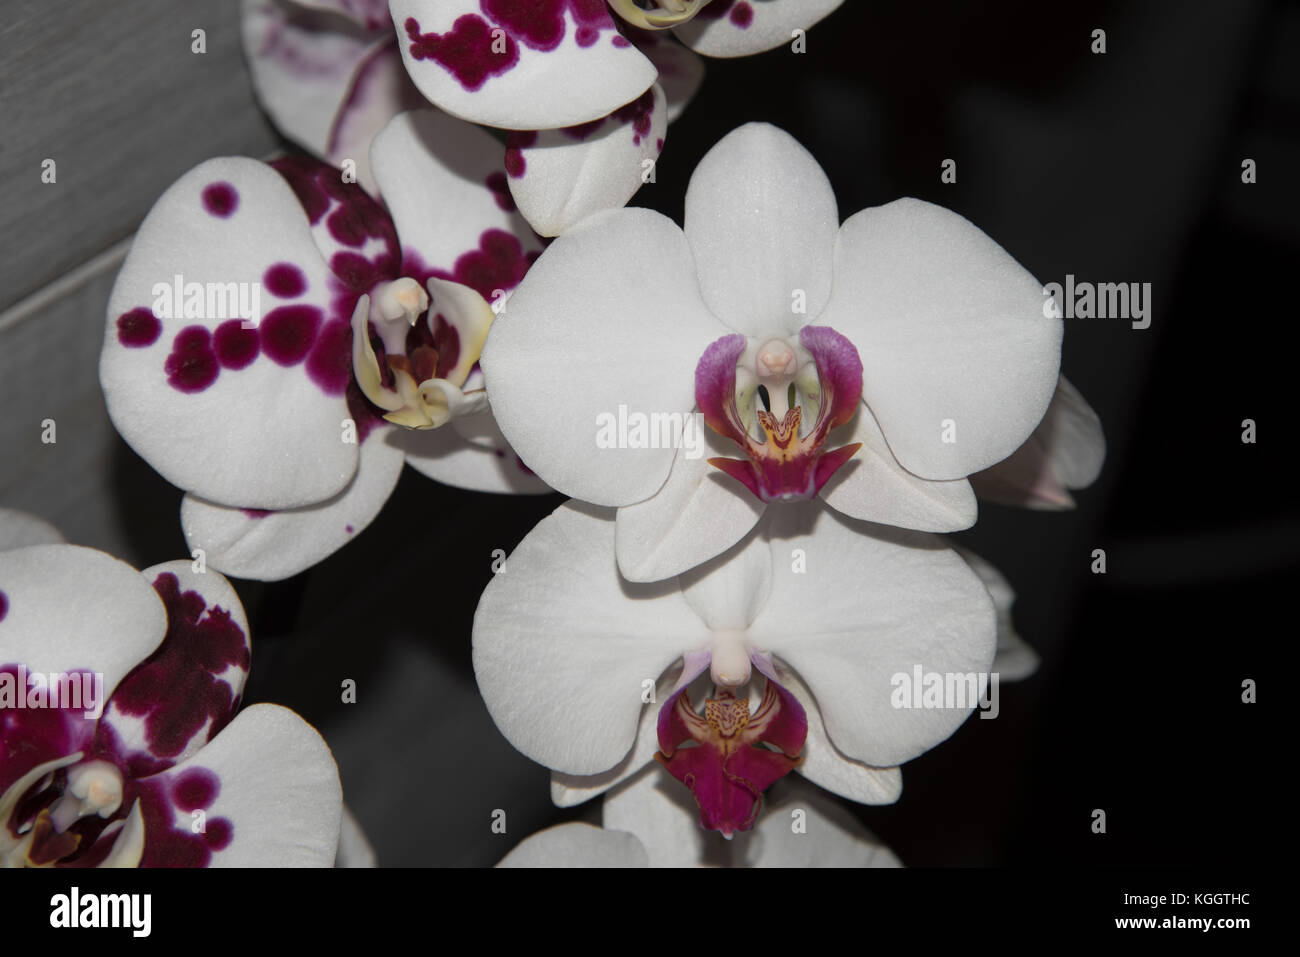 White and purple Orchids, contrasting with dark background. Exotic, elegant and delicate flowers. Stock Photo